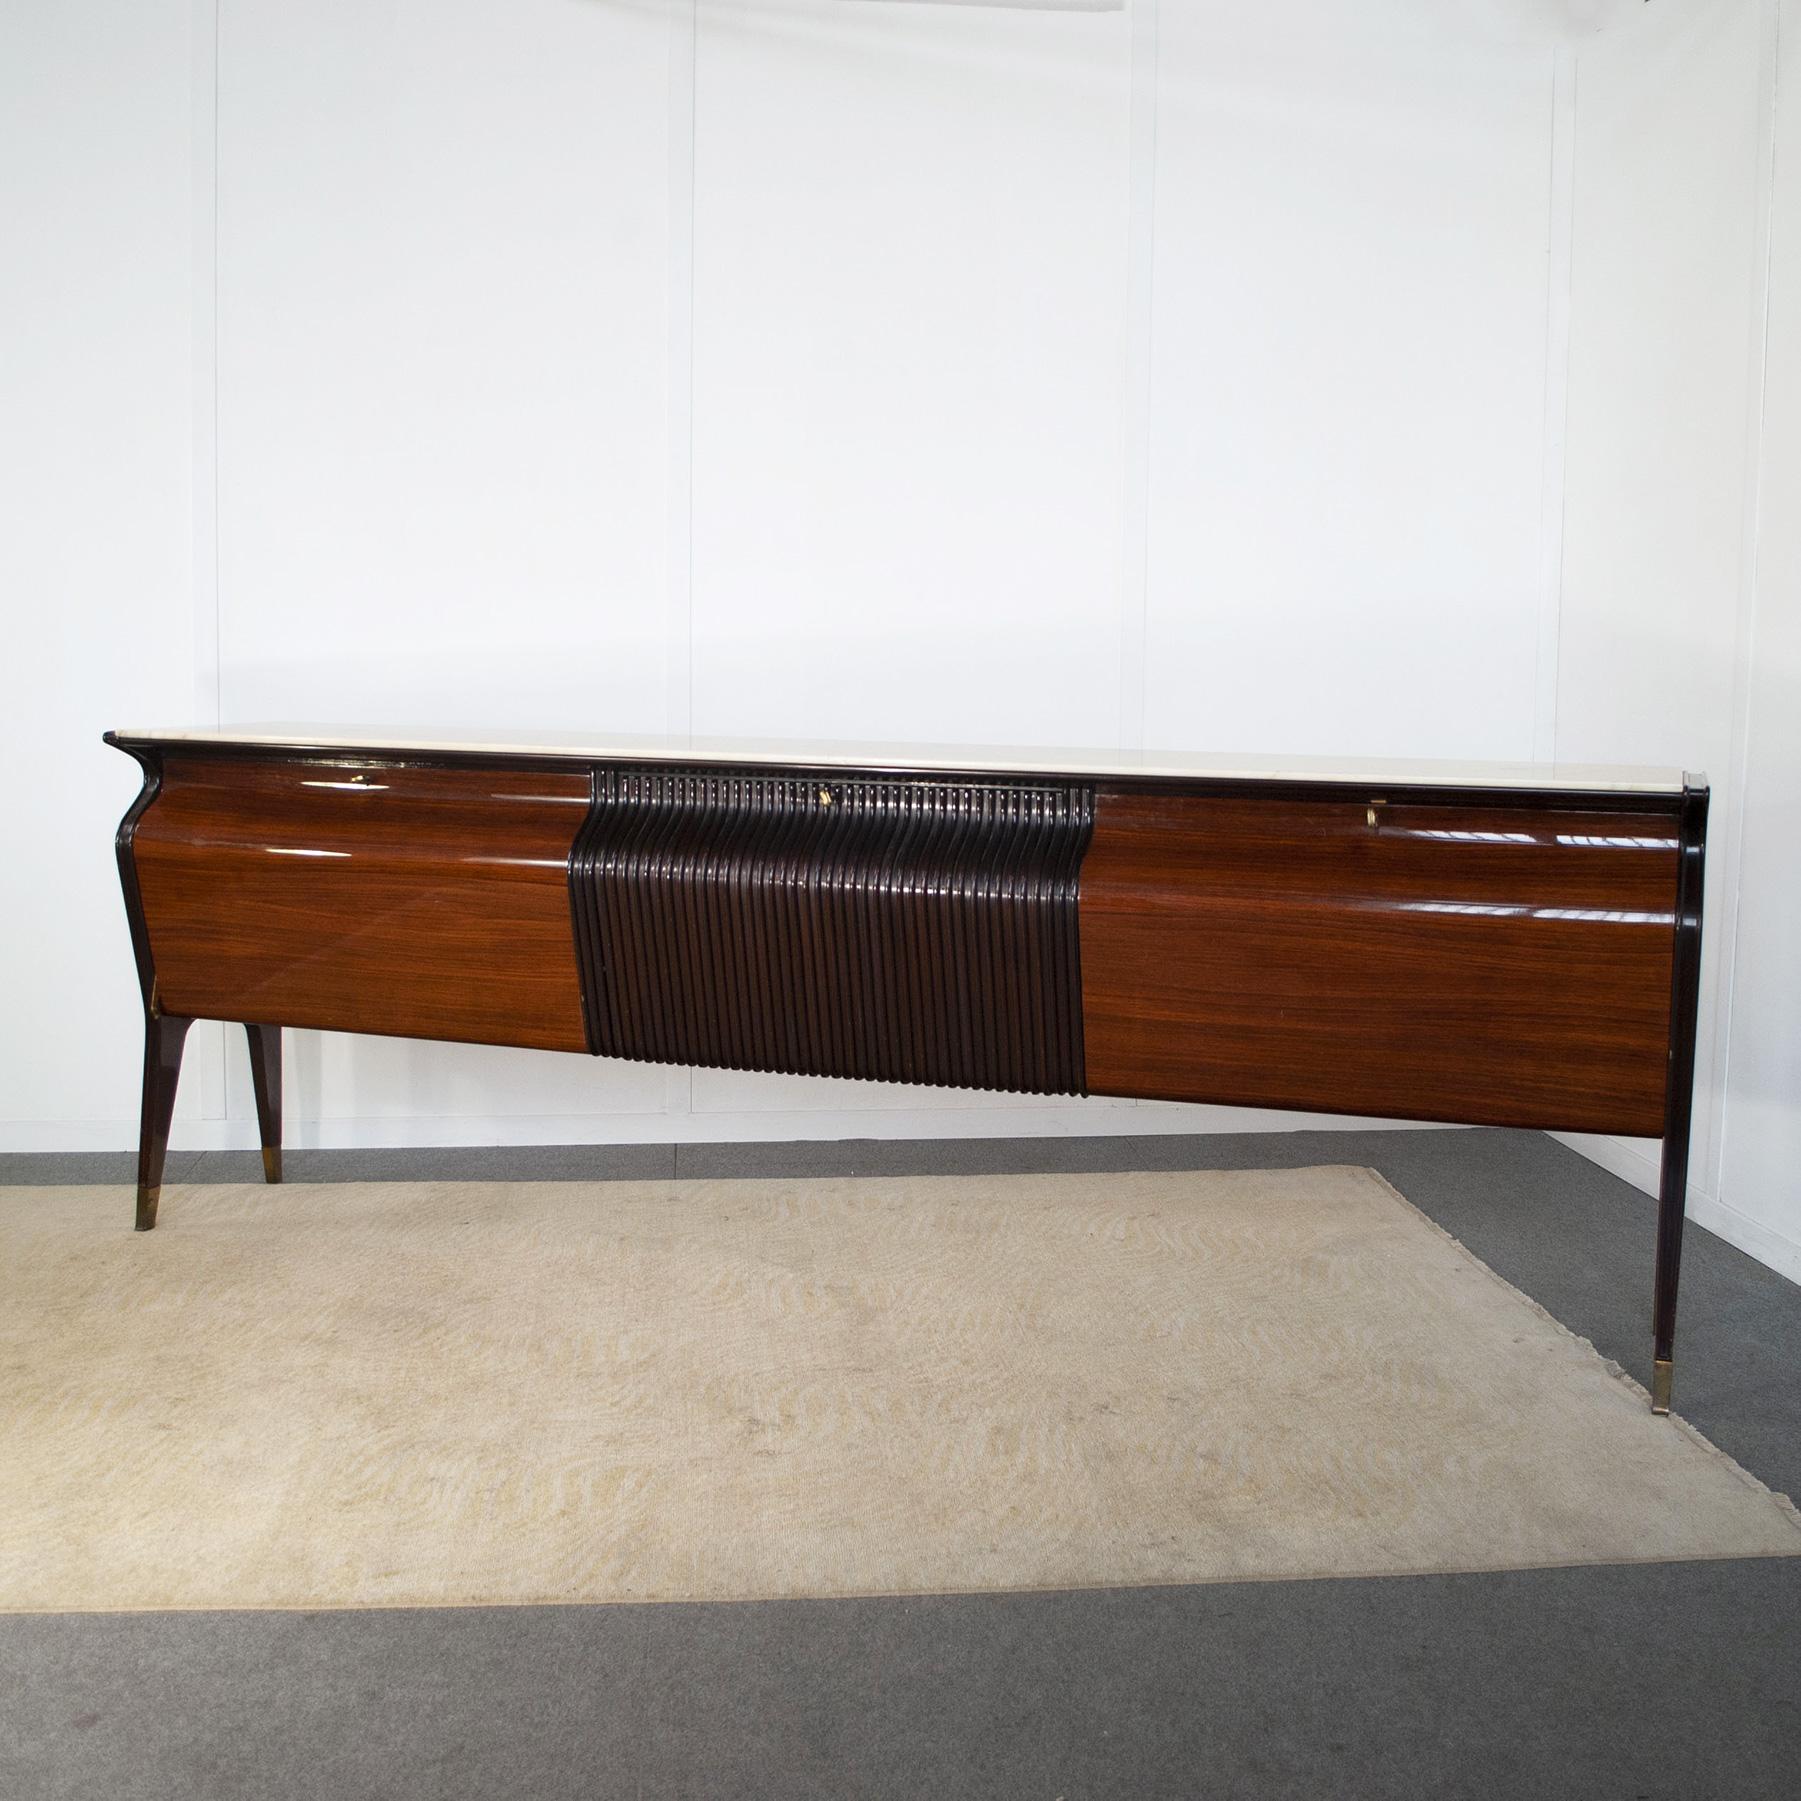 Buffet sideboard in beech veneer and ebonized grising, brass ferrules, marble top production Atelier di Varedo designer Osvaldo Borsani 1950s.


Osvaldo Borsani was born in Varedo in Brianza in 1911 into a family of furniture manufacturers with a